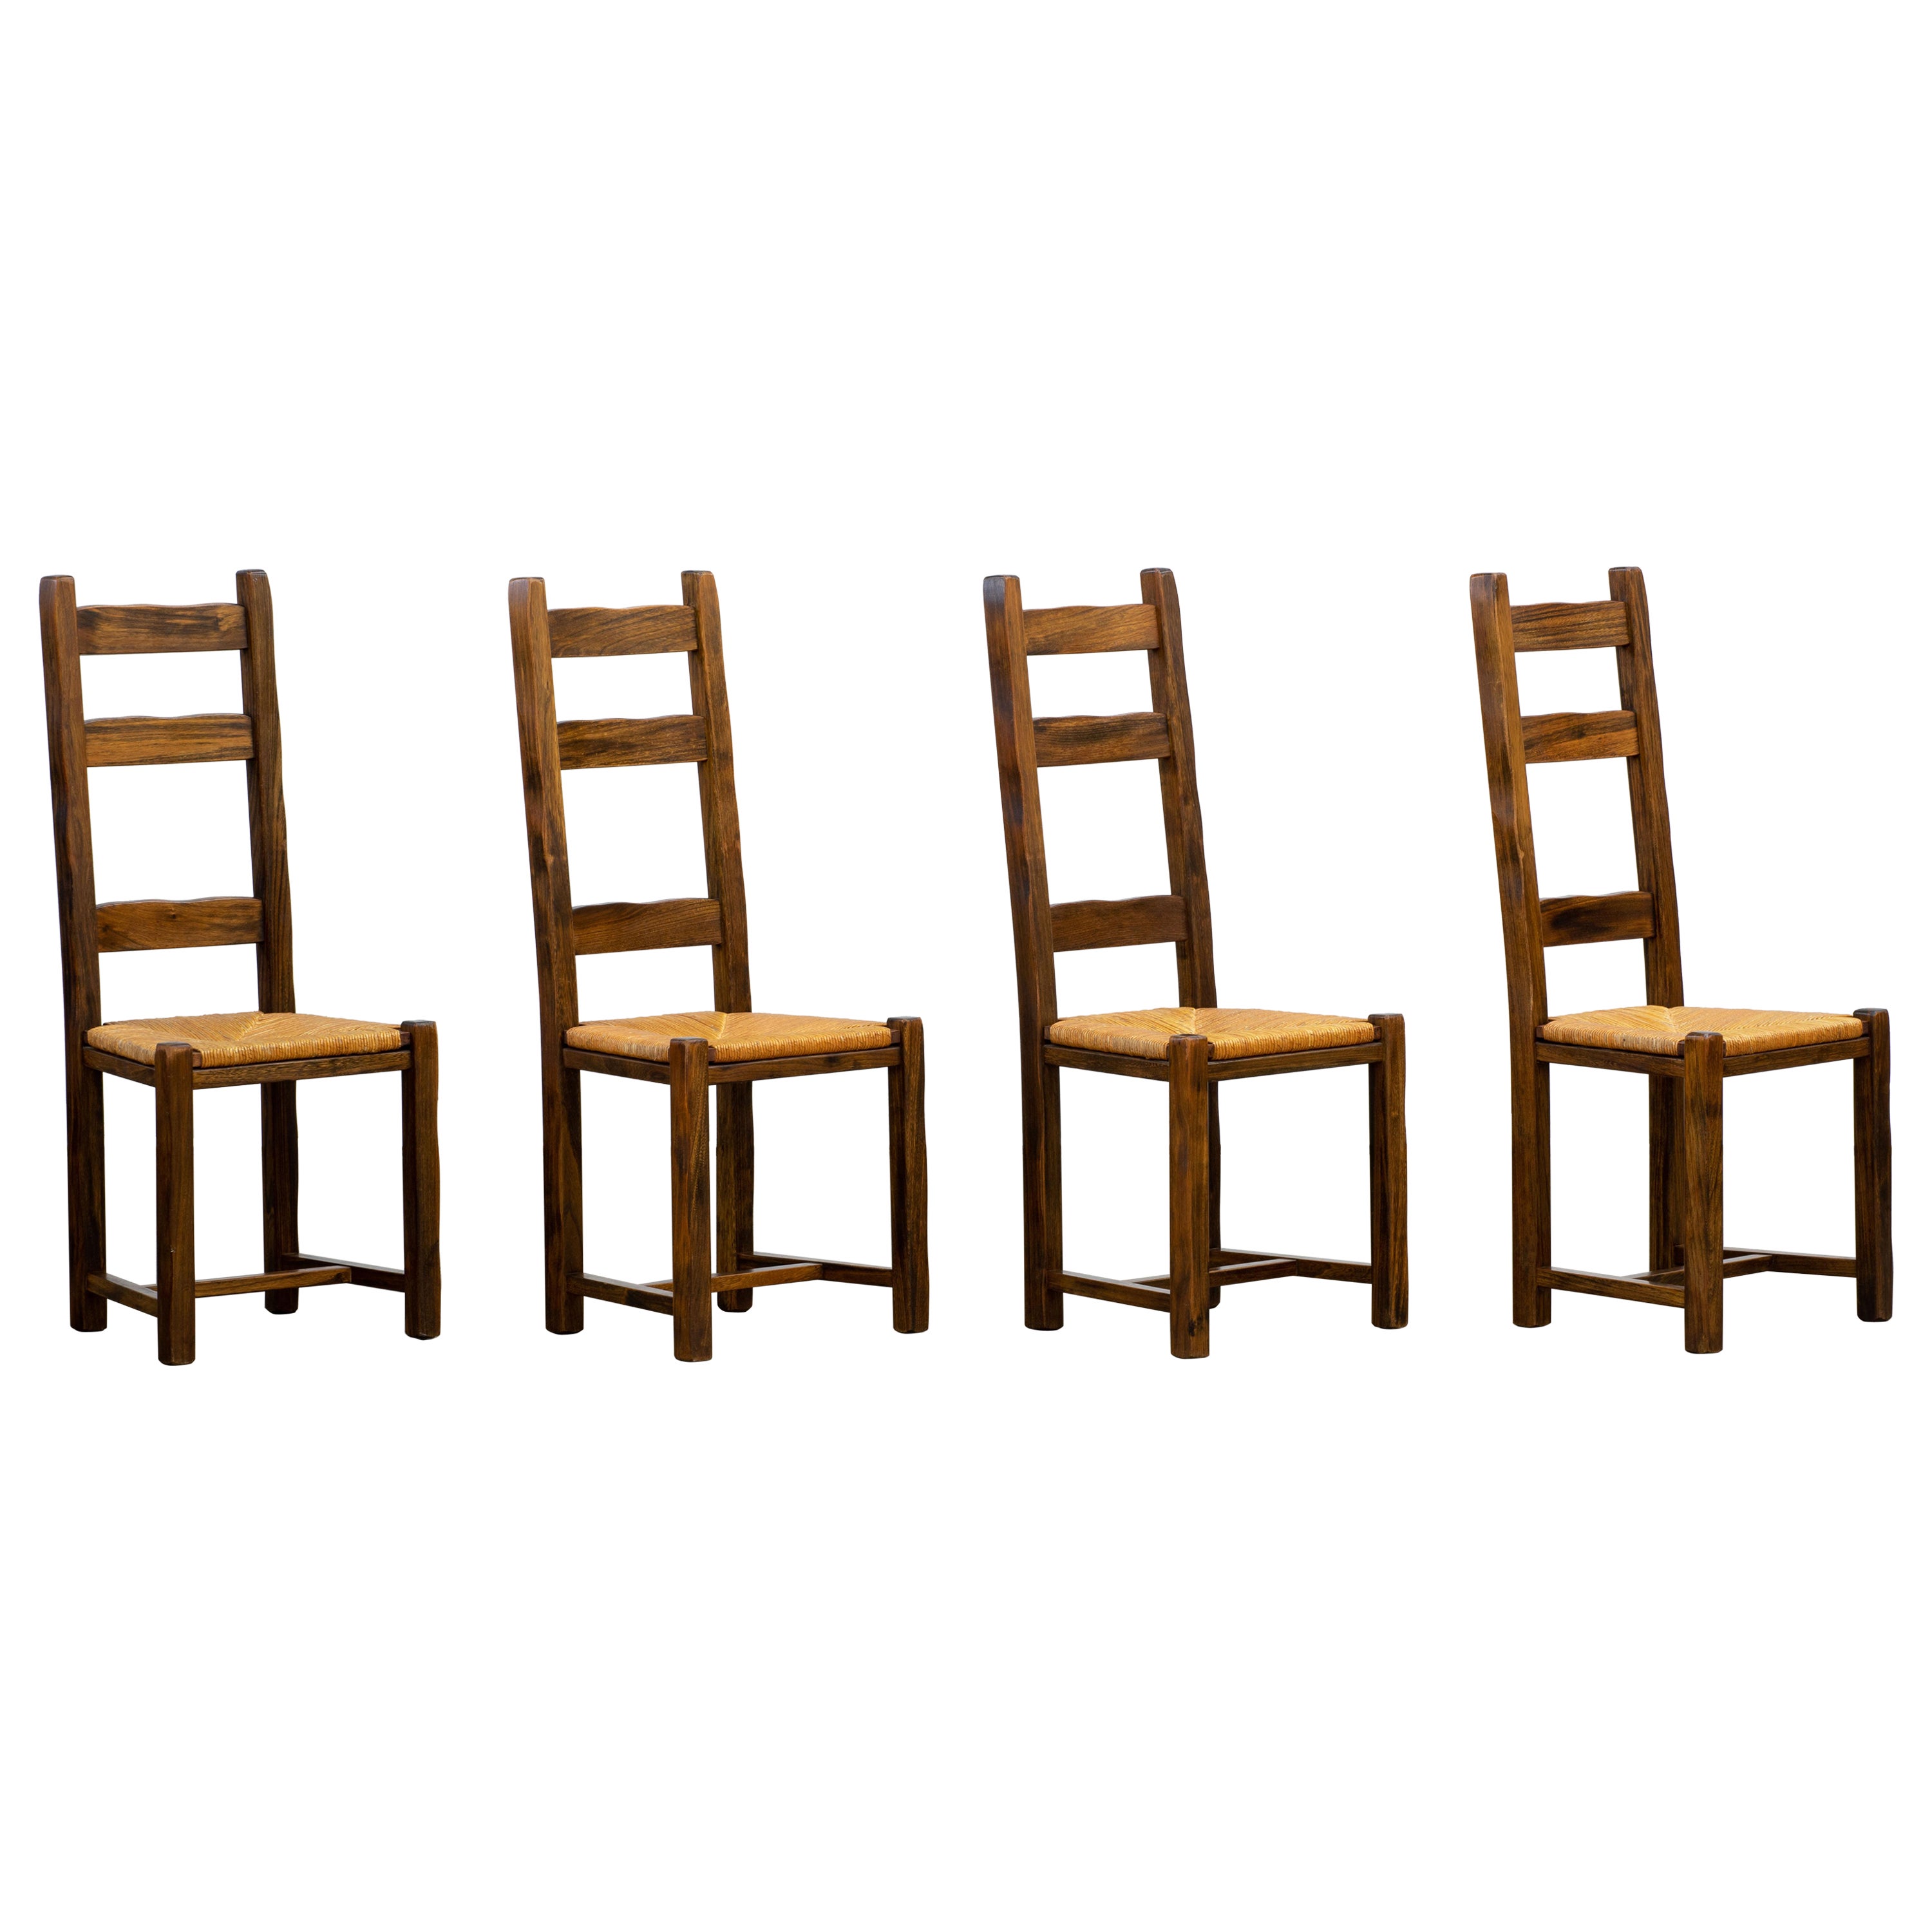 Rustic Set of 4 Chairs, Solid Elm, by Olavi Hanninen